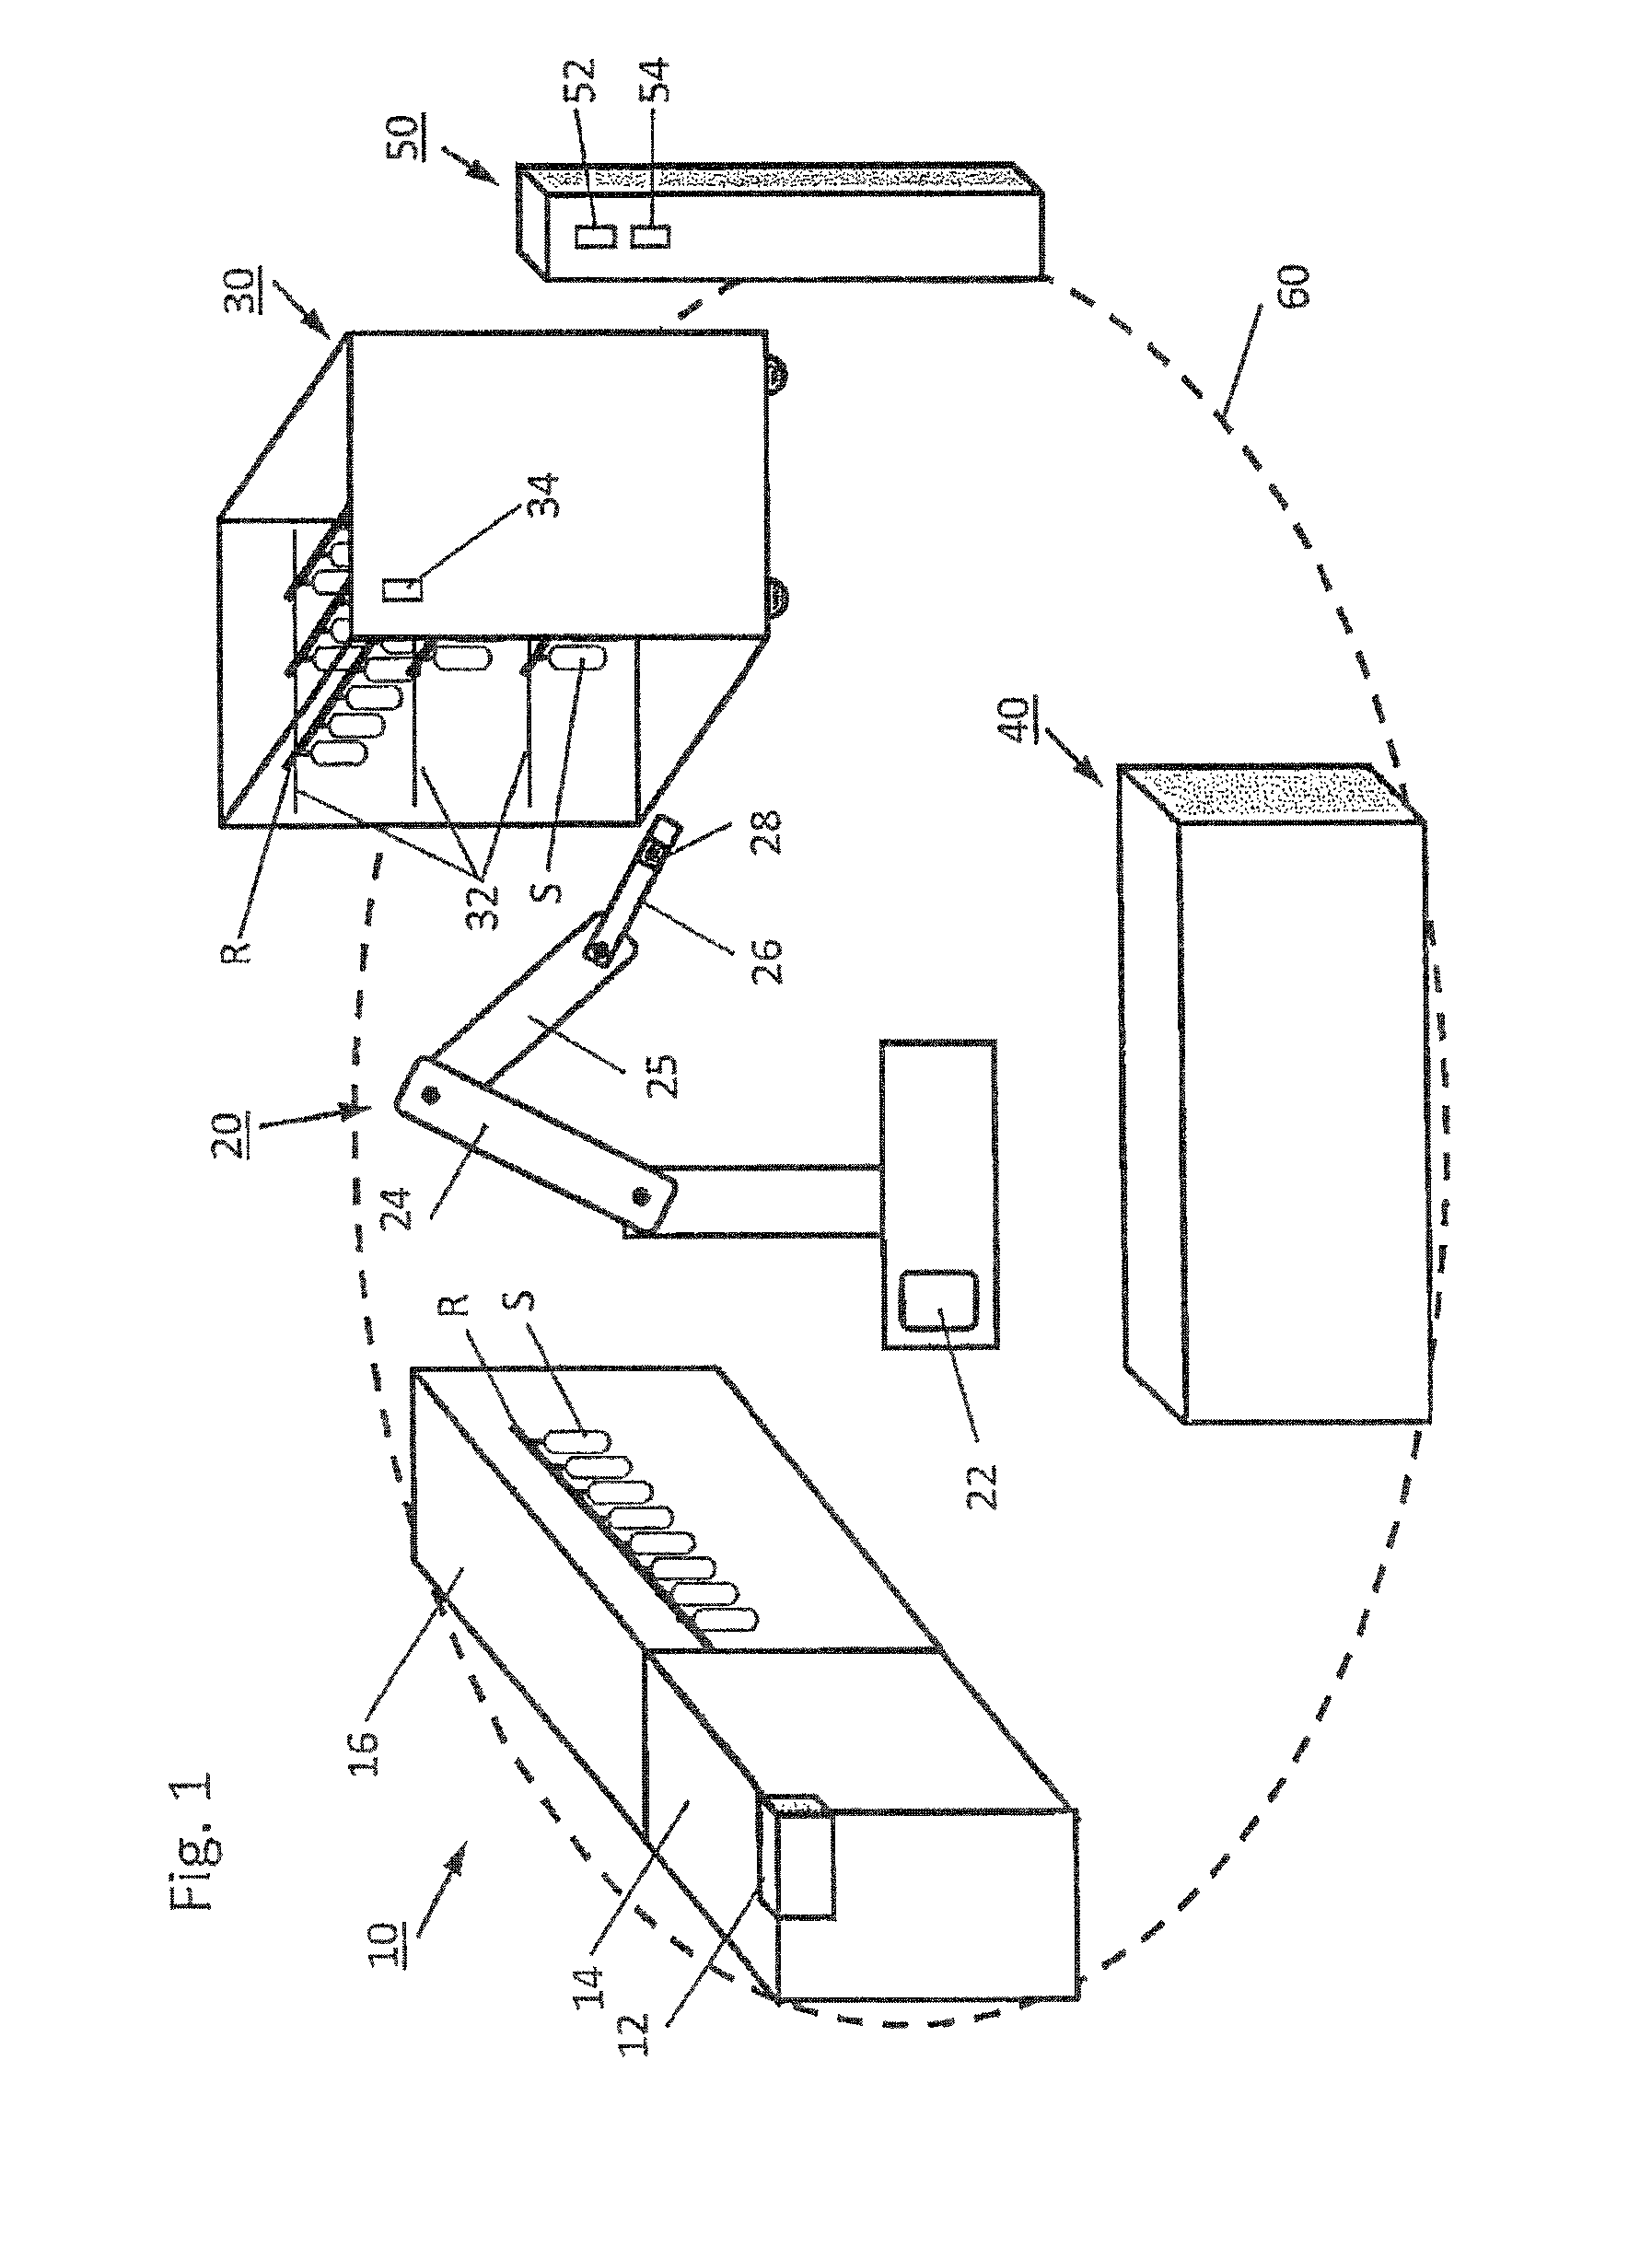 Robotic device for inserting or removing rod-like elements